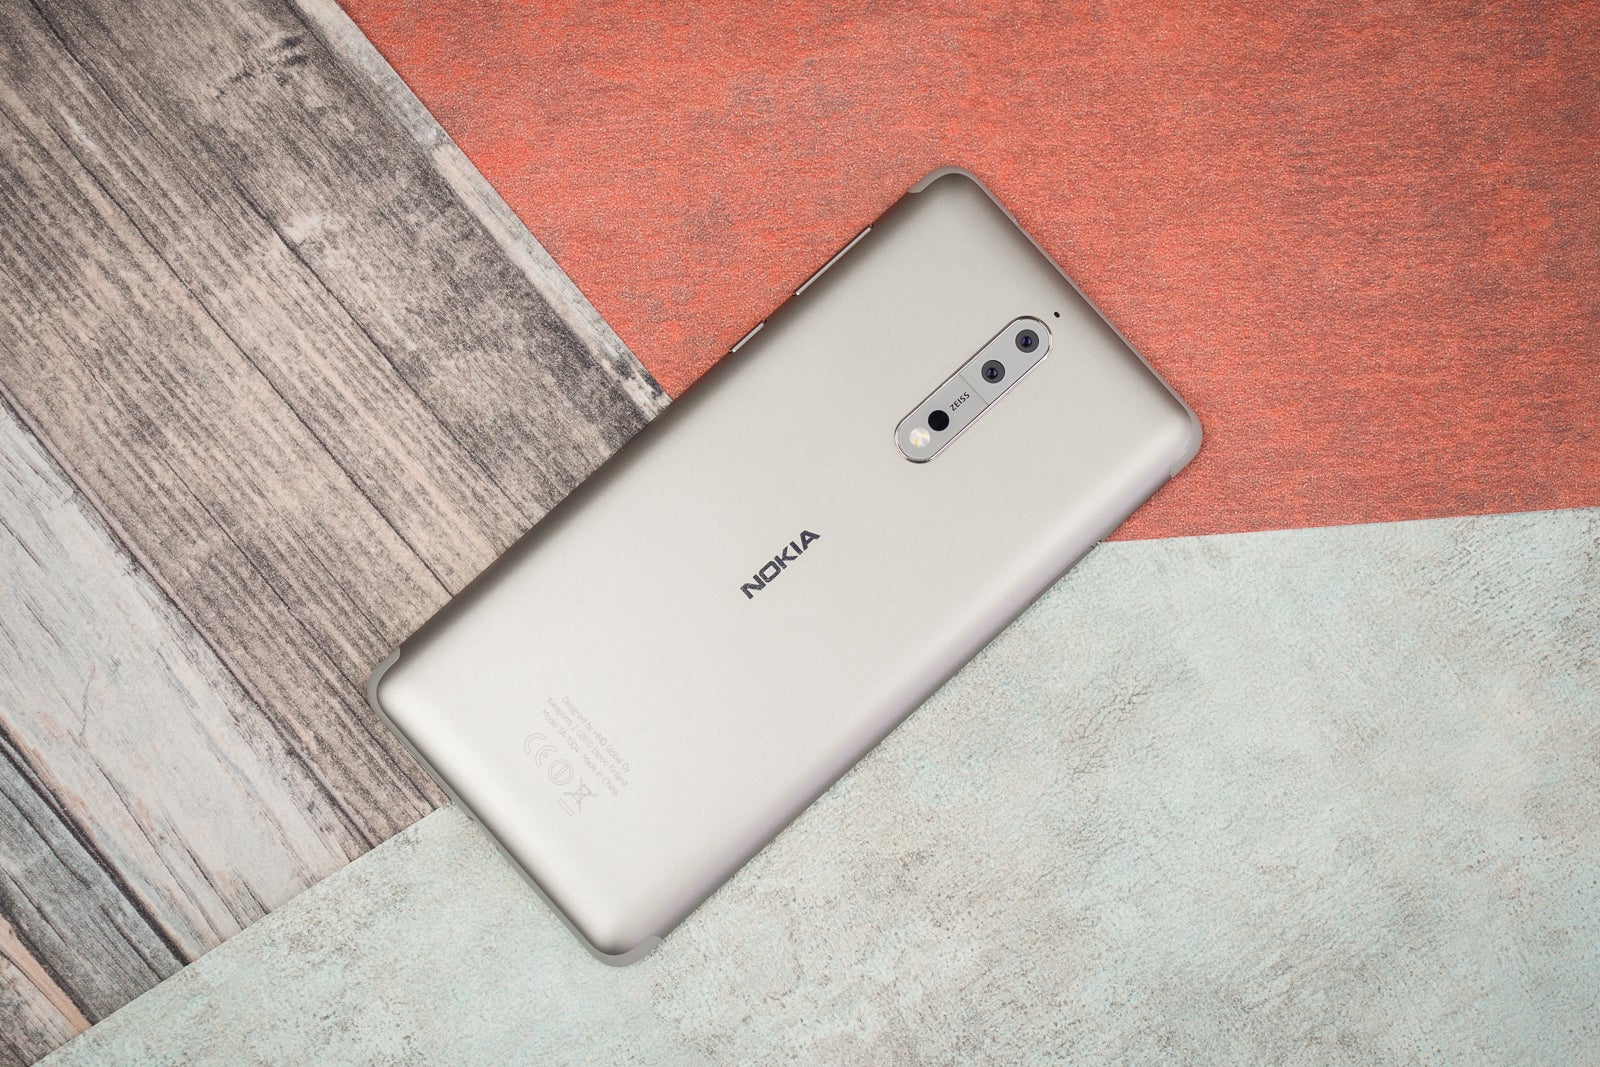 Nokia 8 and Nokia 3 get new update with security improvements